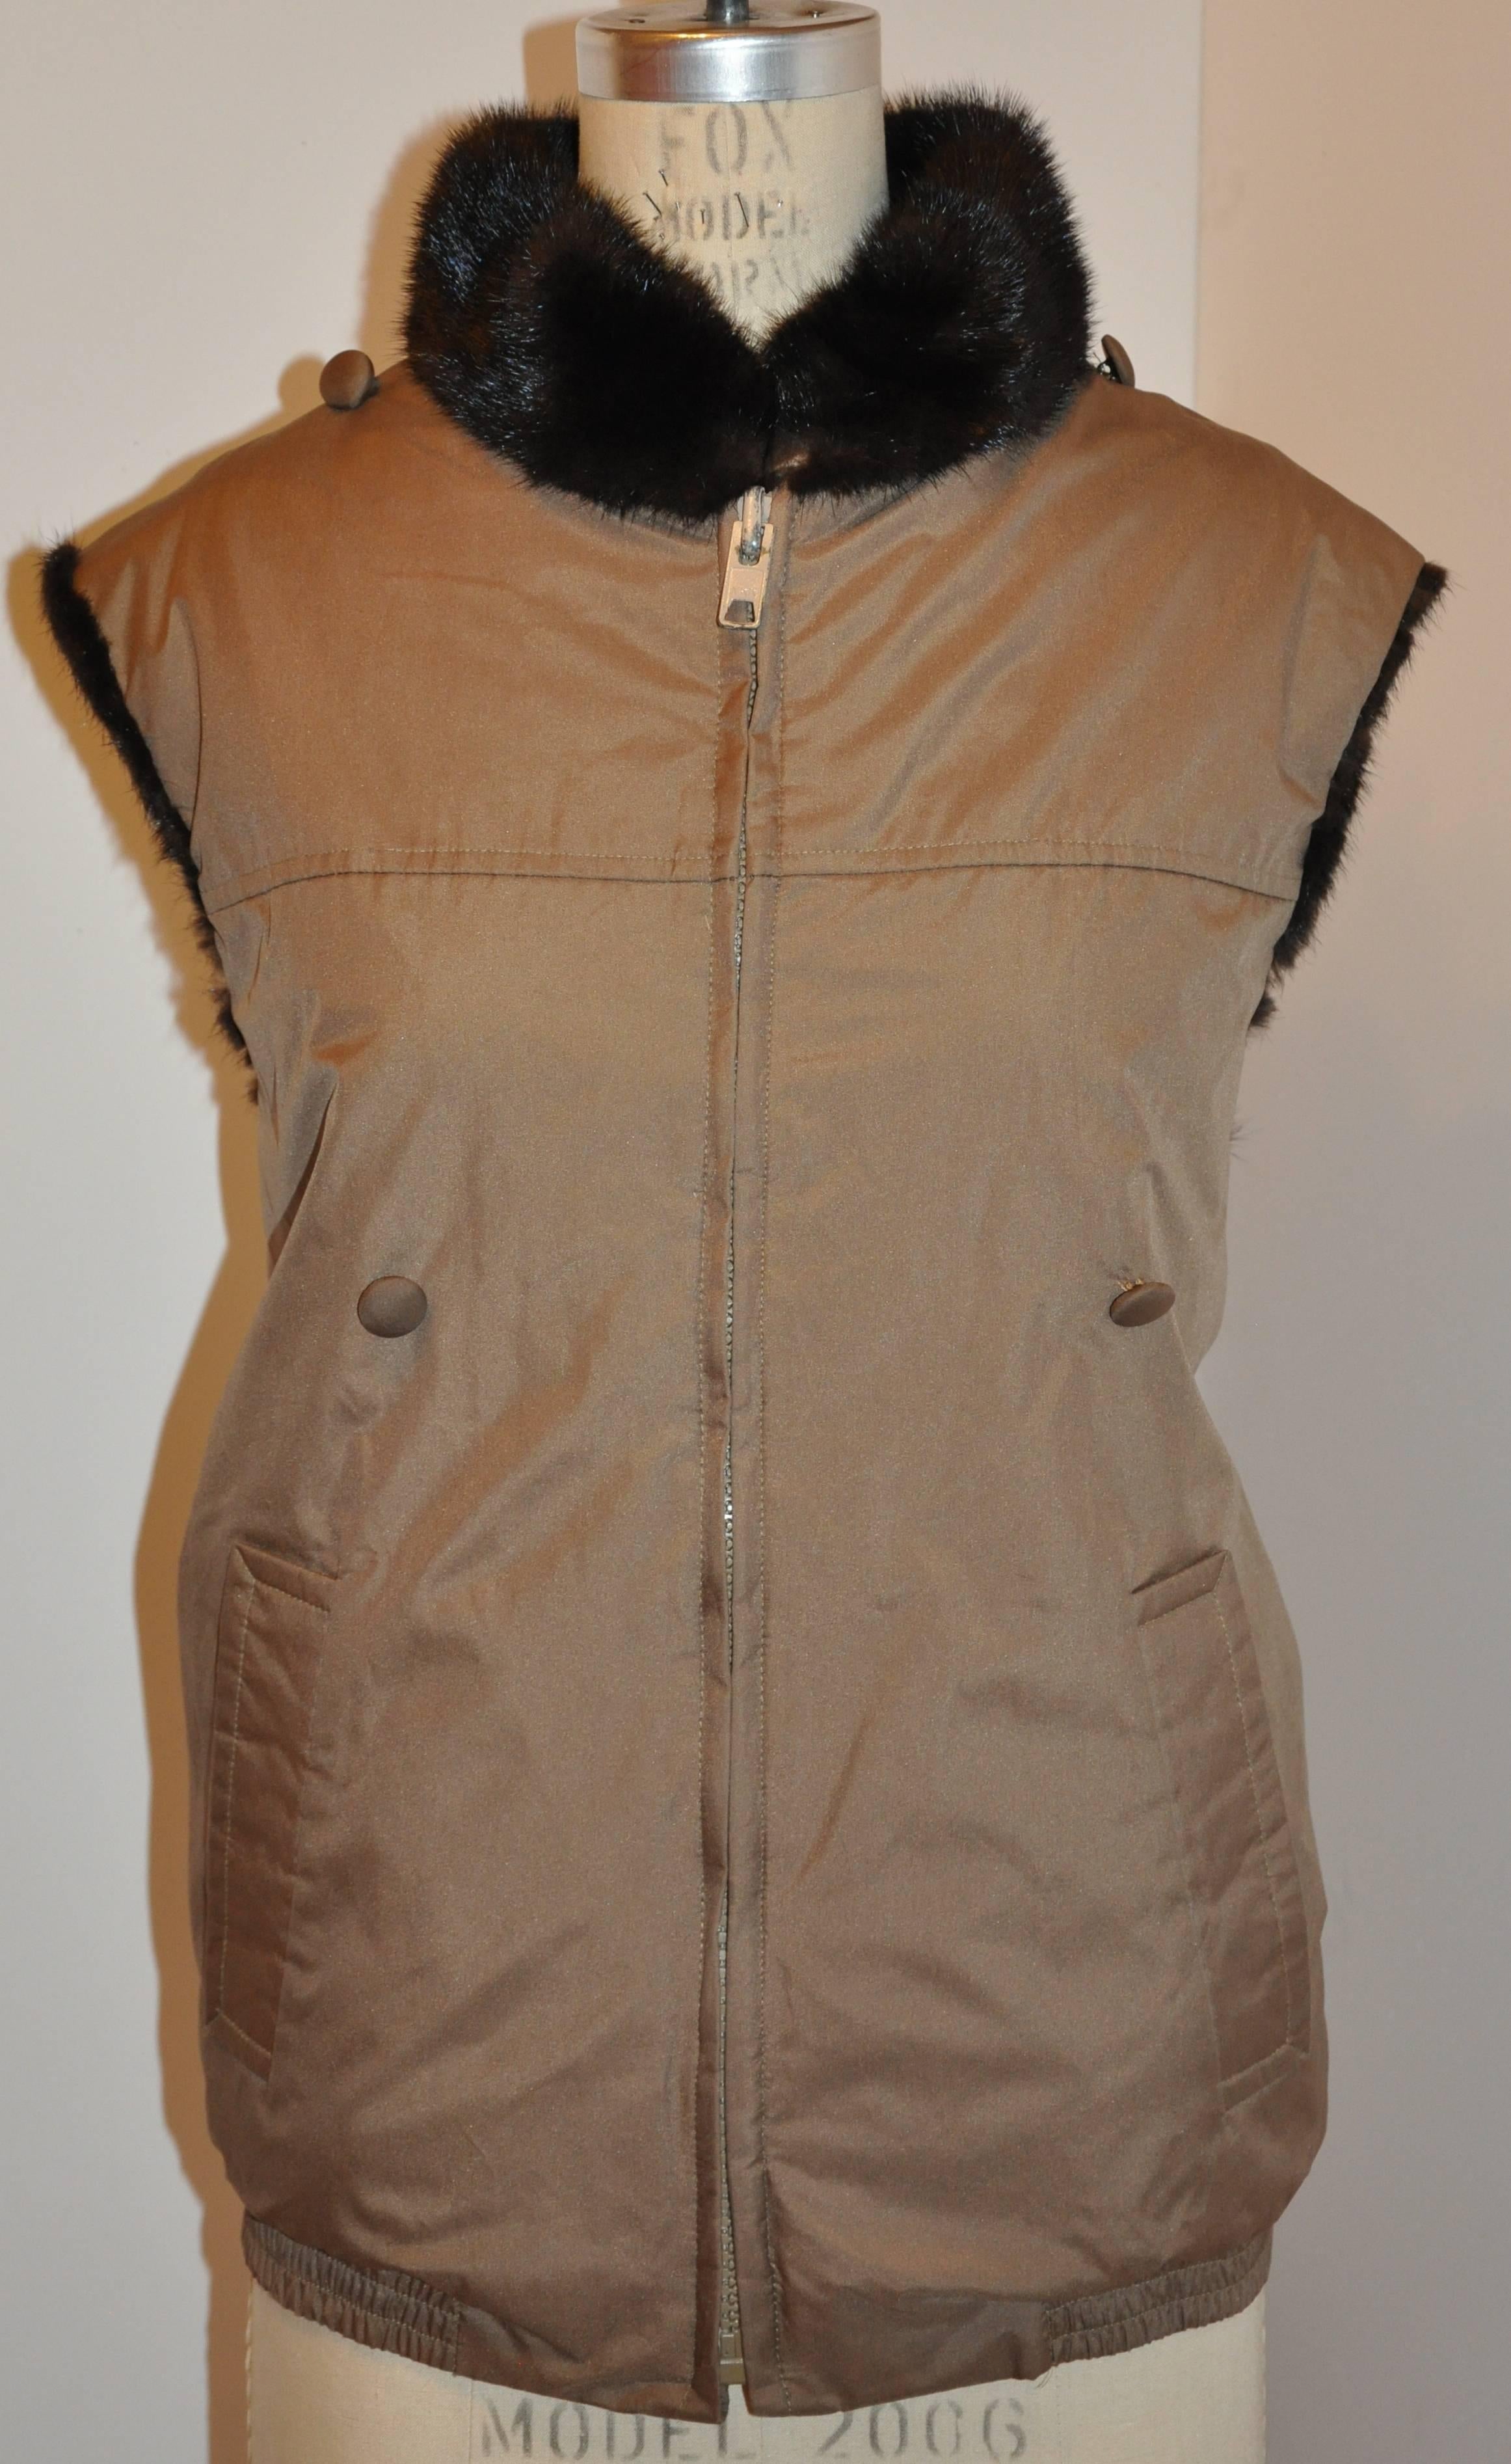        This wonderfully detailed jacket is reversible with mink on one side and waterproof taupe fabric on the other side. The removable sleeves are lined with mink as well. To remove the sleeves, just unbutton and instantly it's a vest when